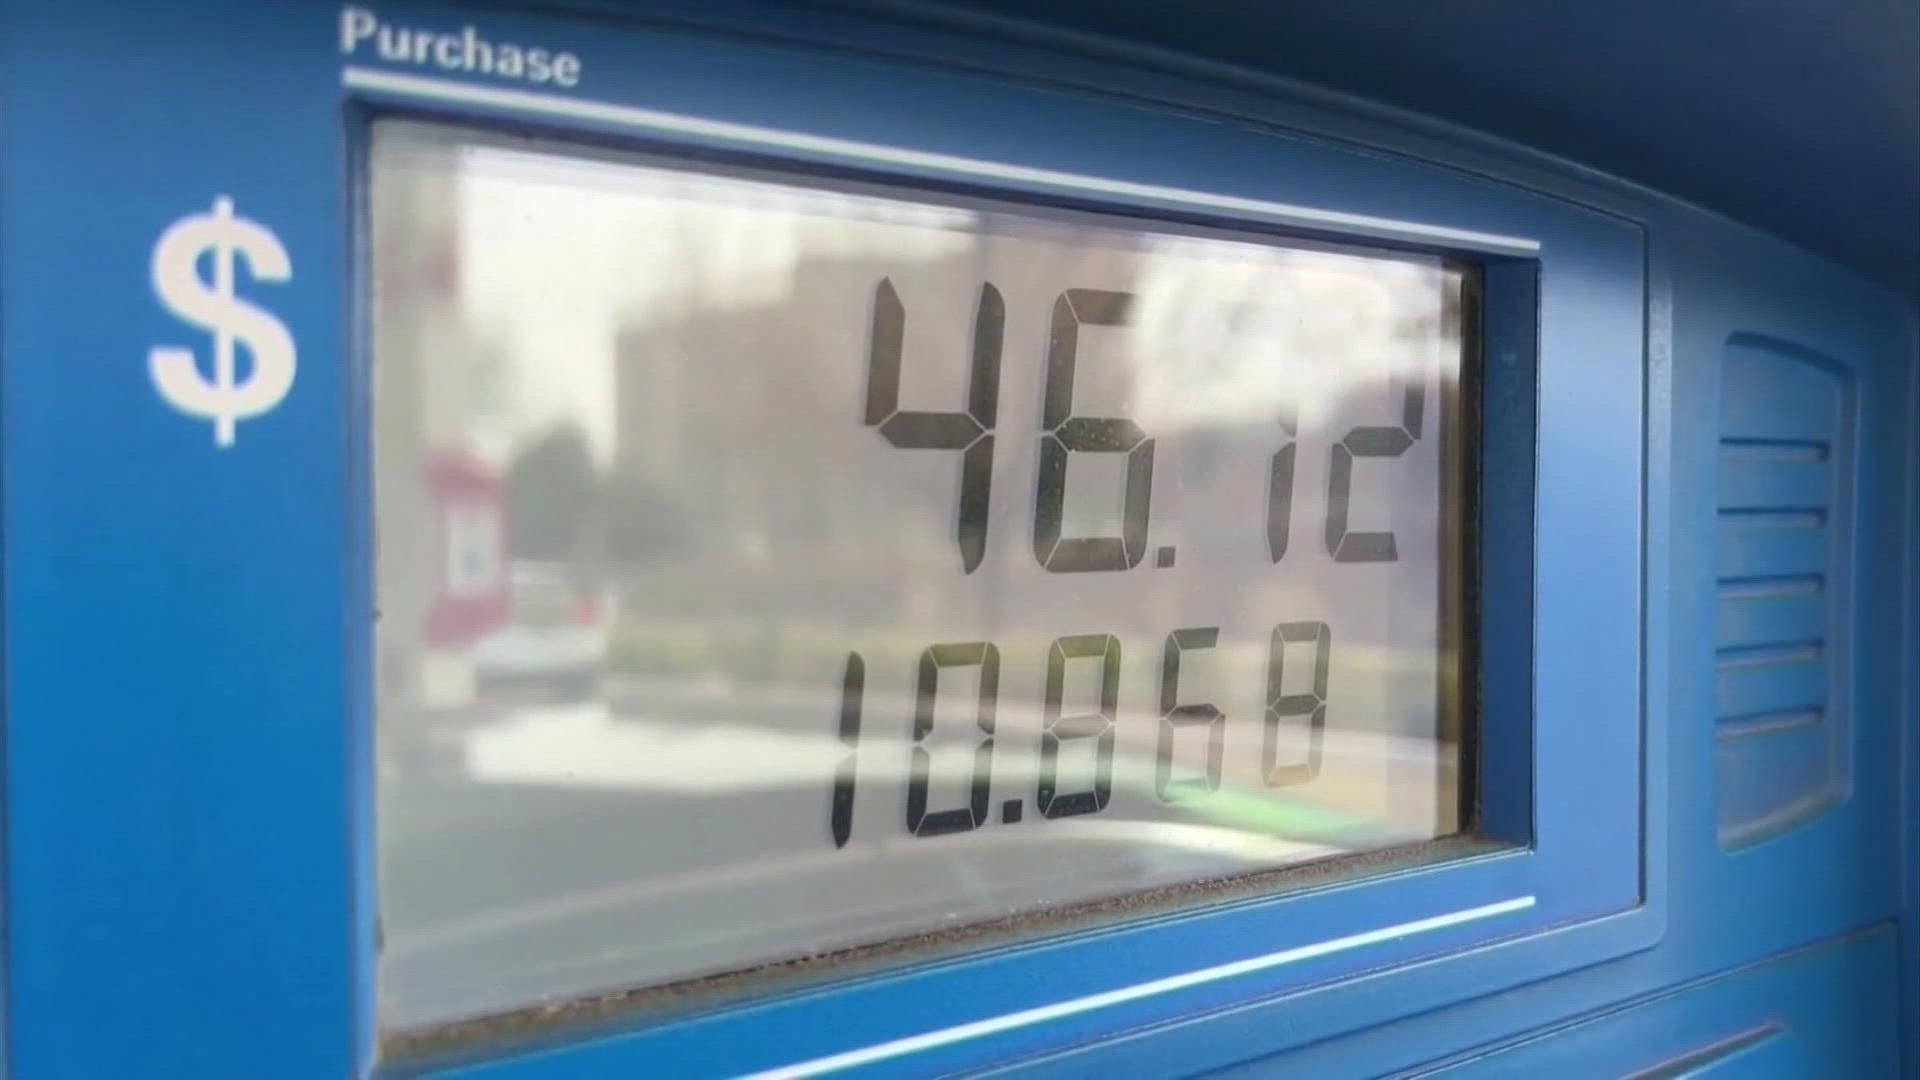 Experts predict gas will remain above $4 per gallon for regular gas until November.